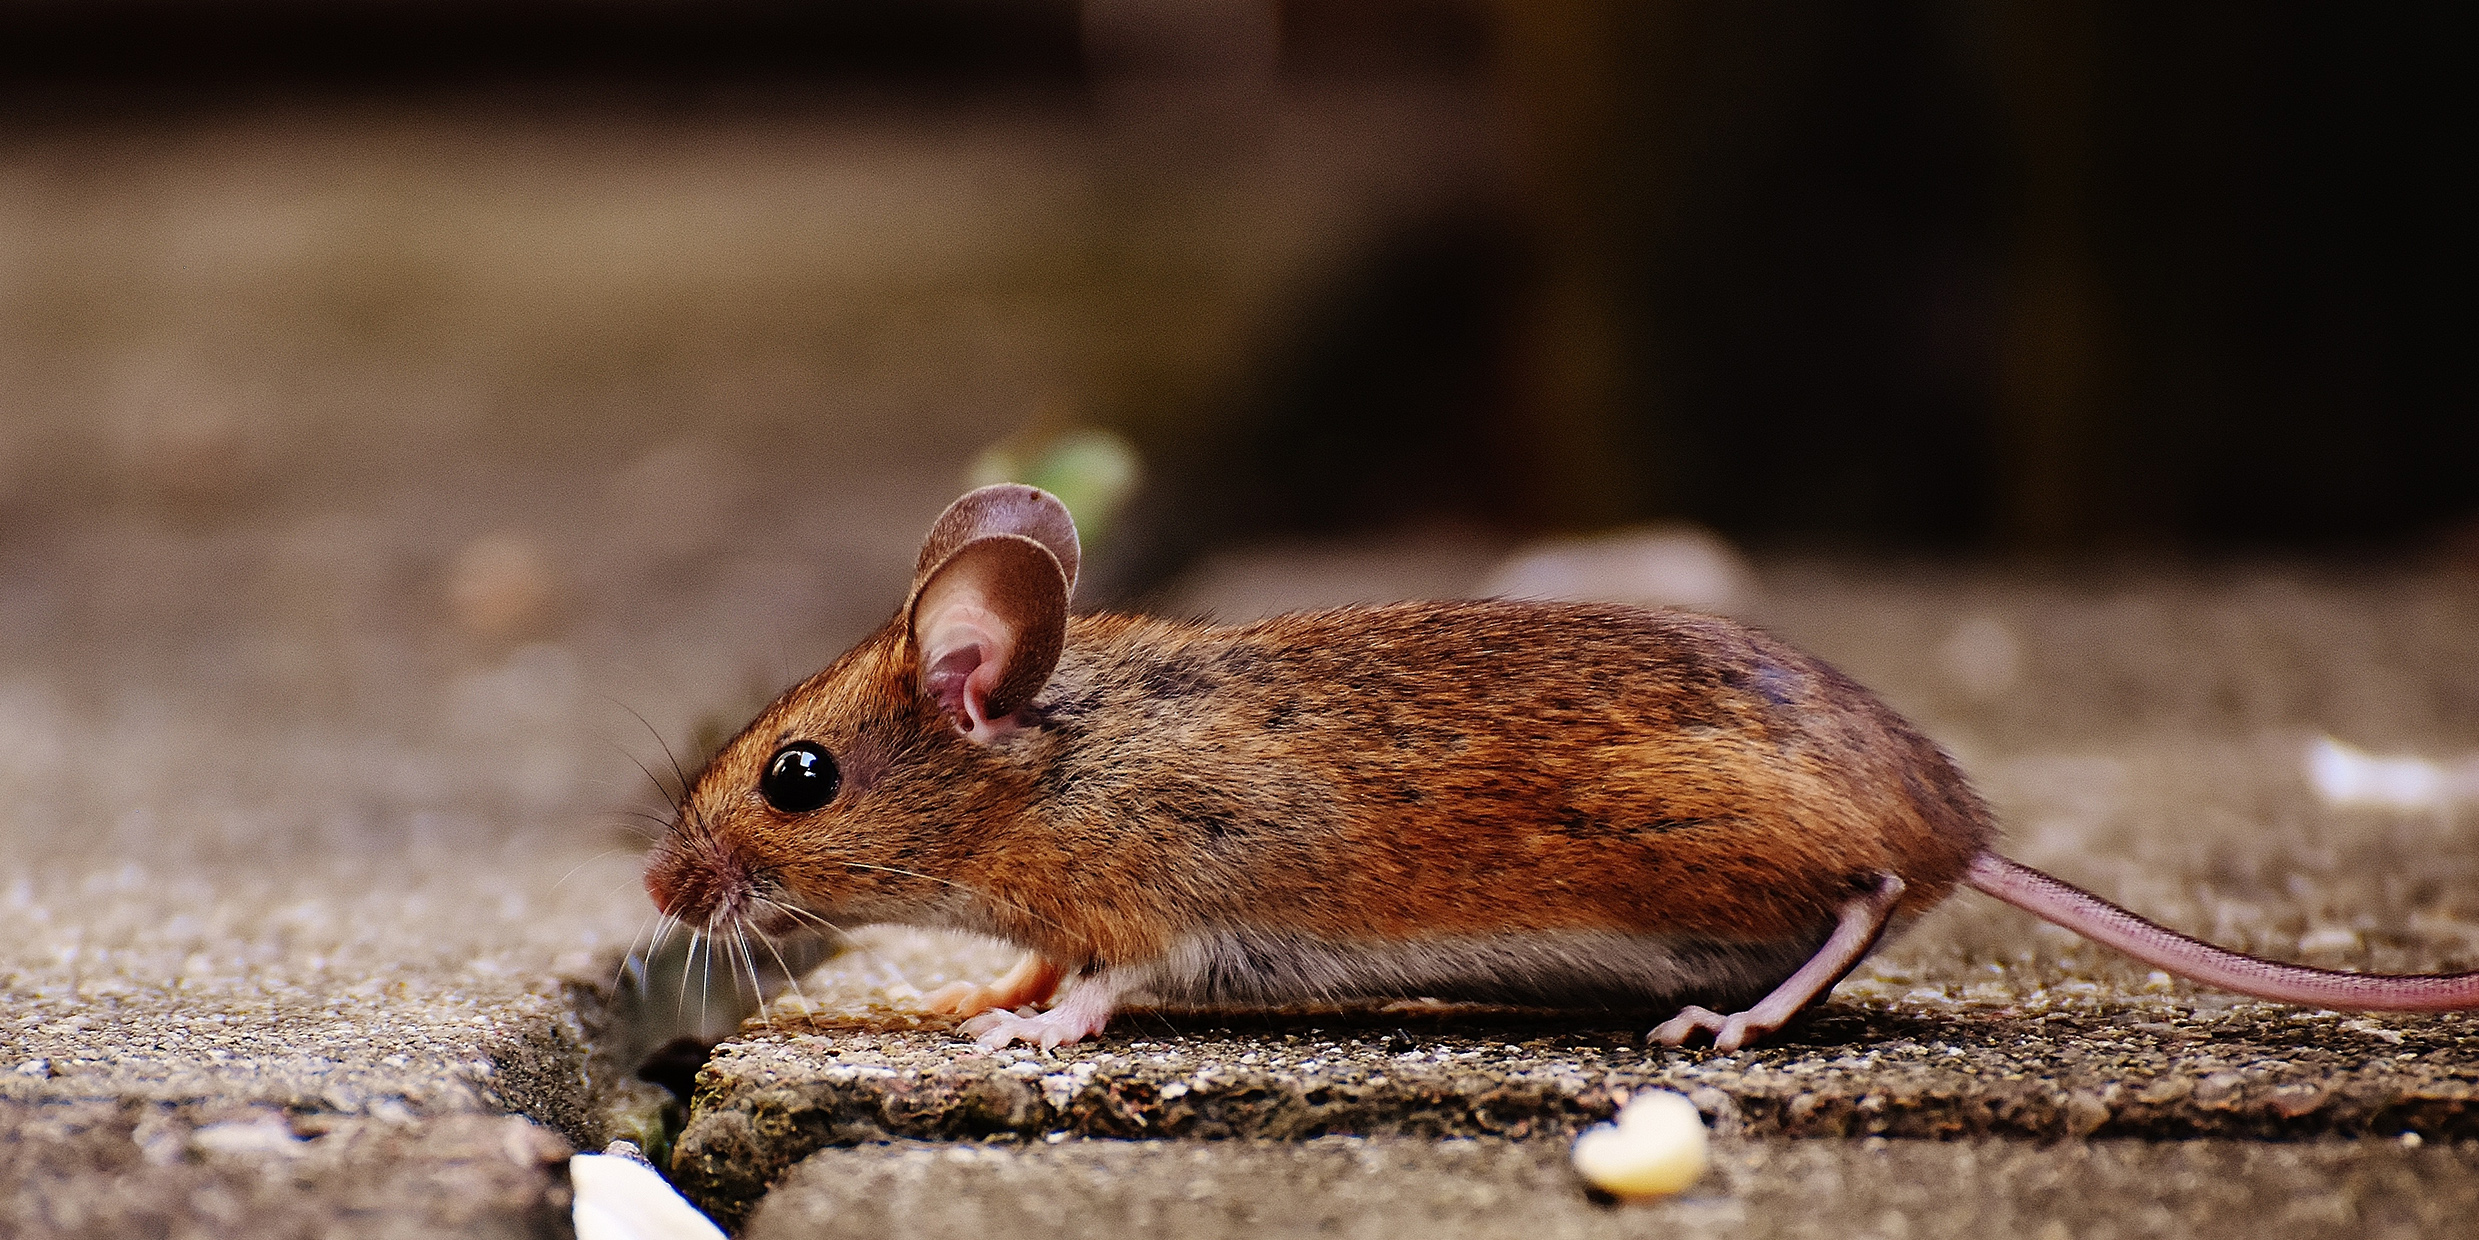 Does the world need smarter mice?